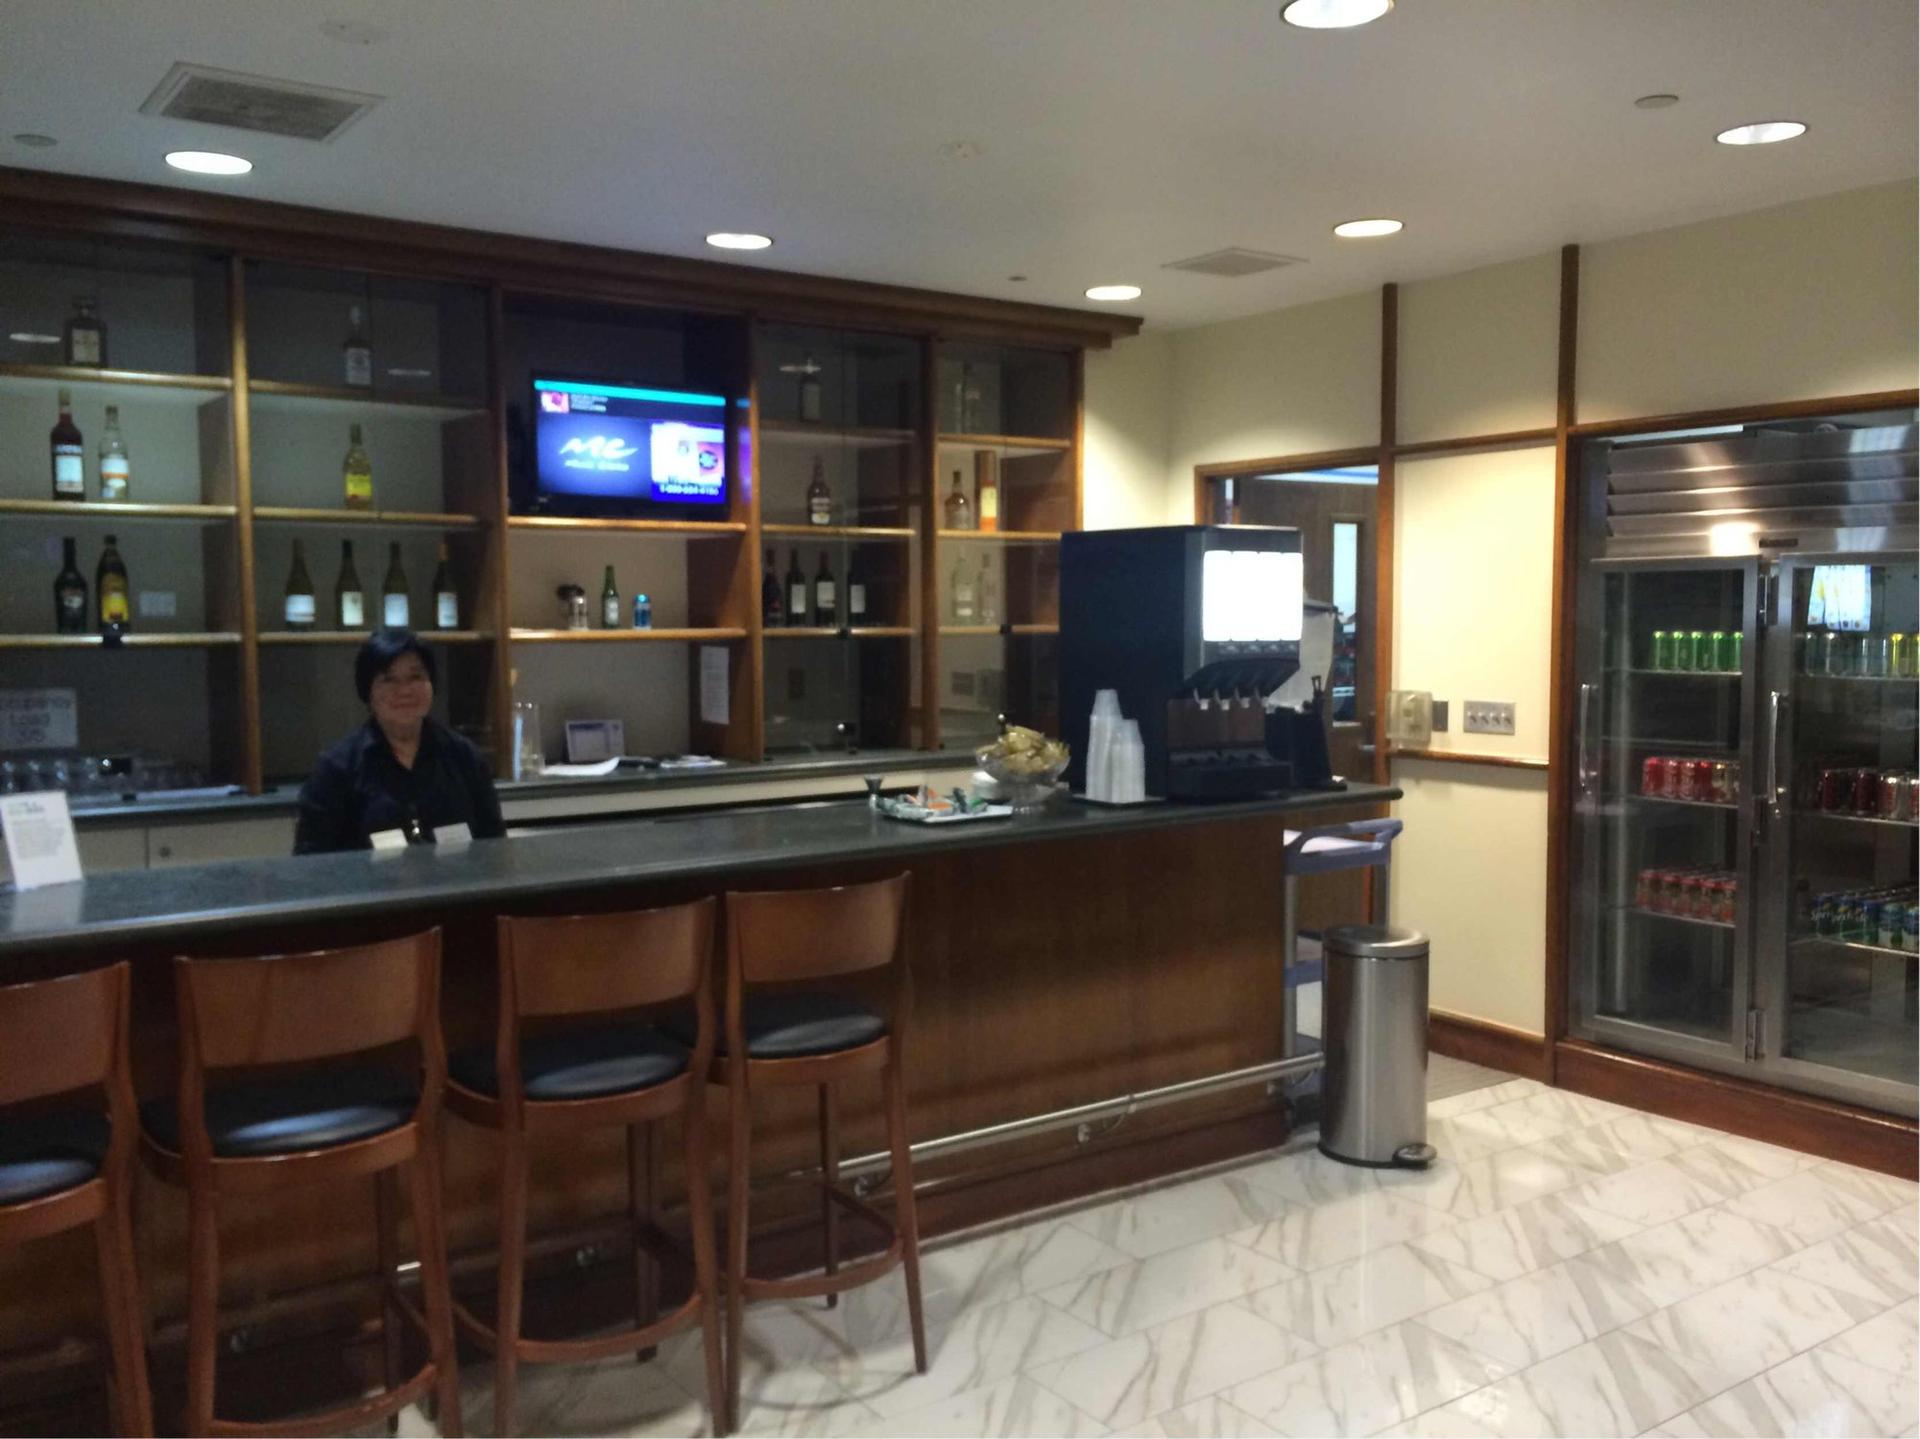 United Airlines United Club image 37 of 40